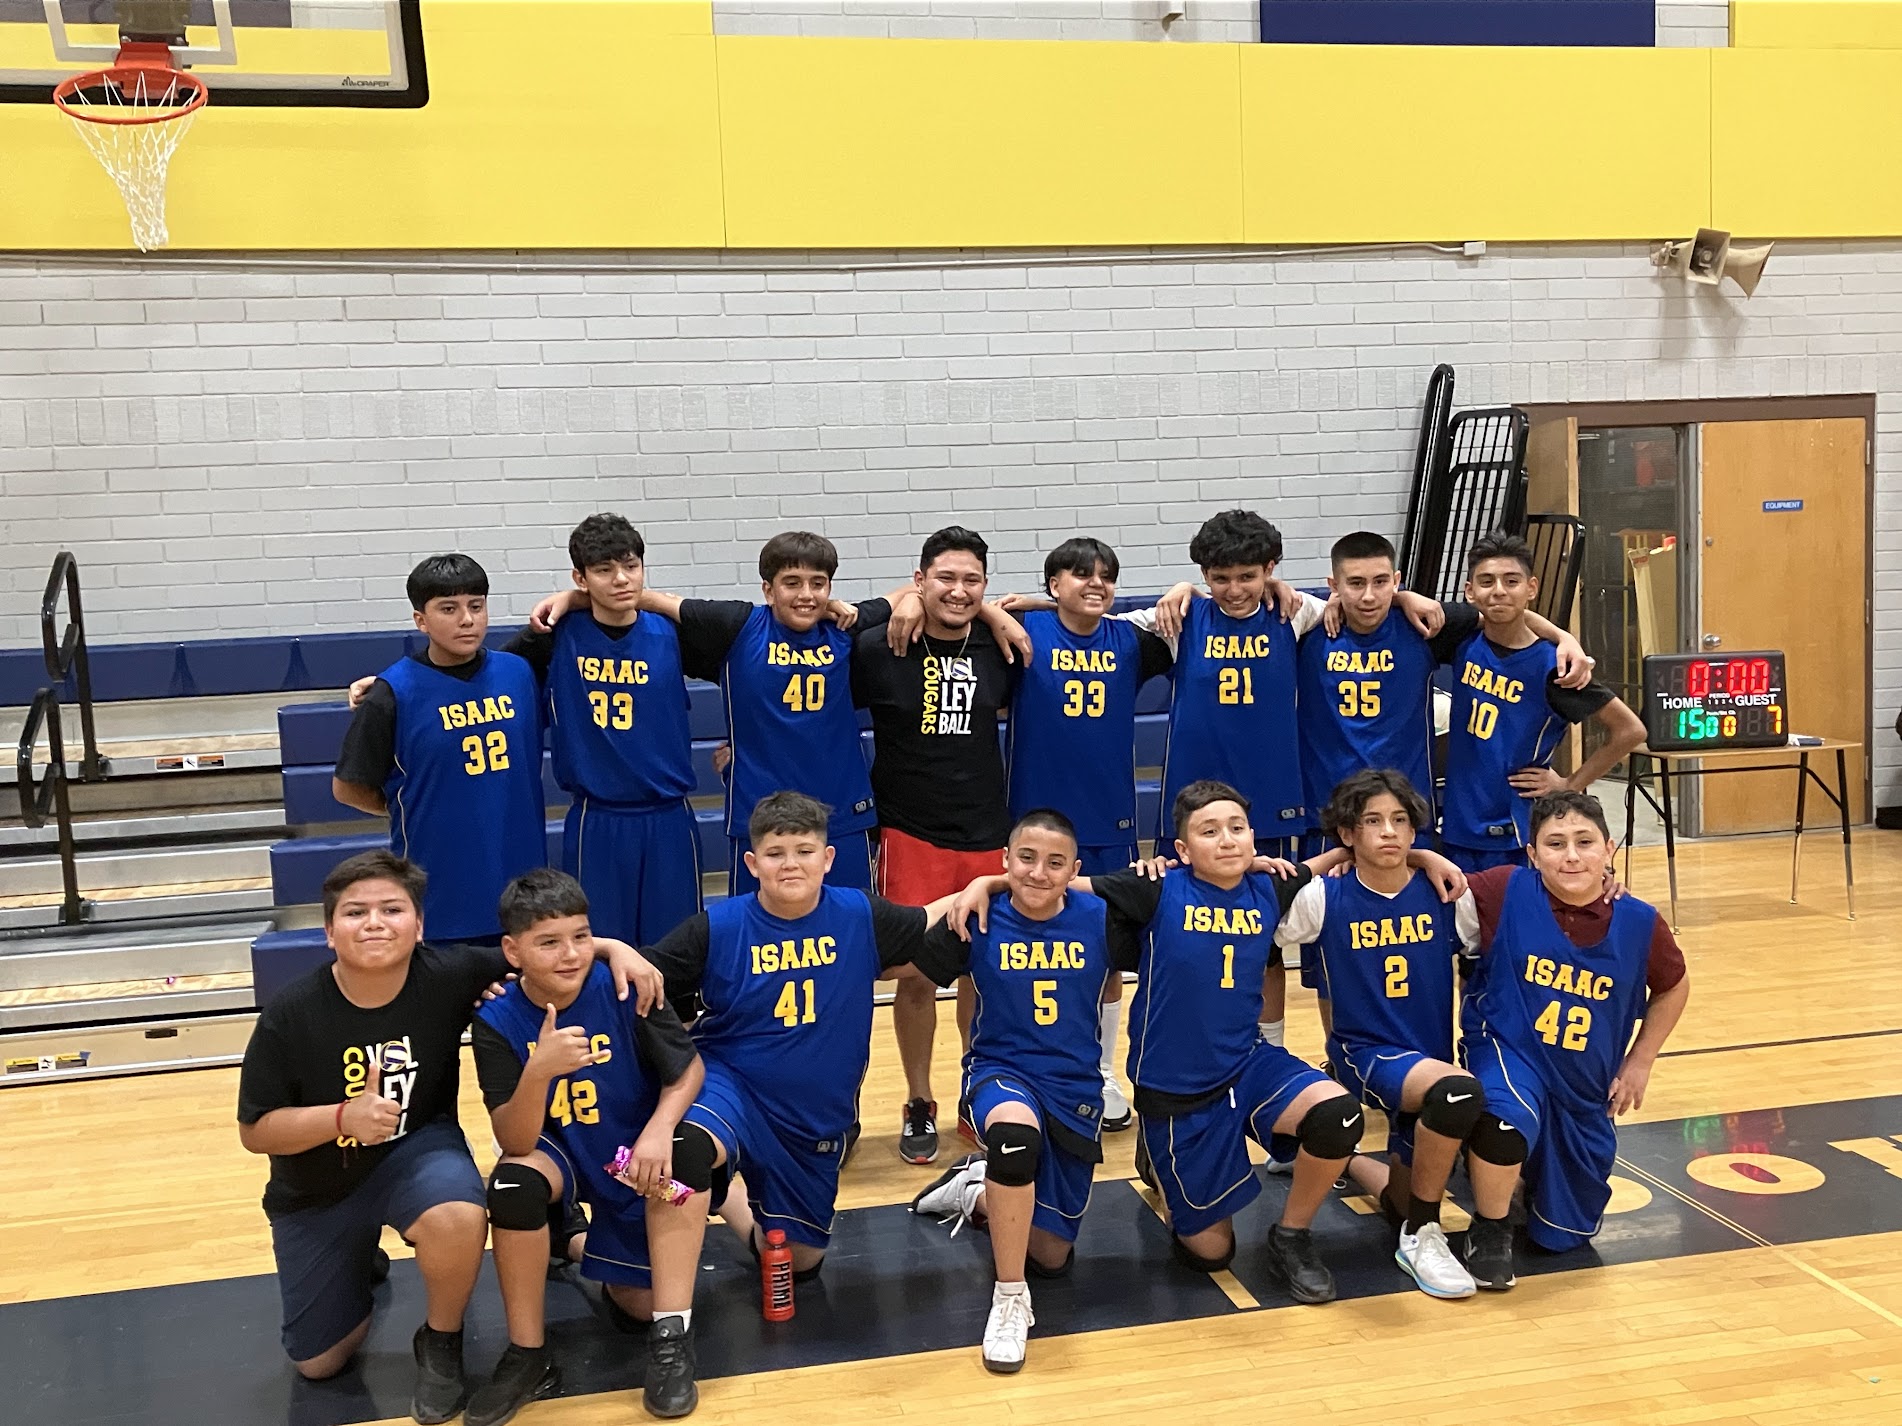 Boy volleyball students taking a group photo